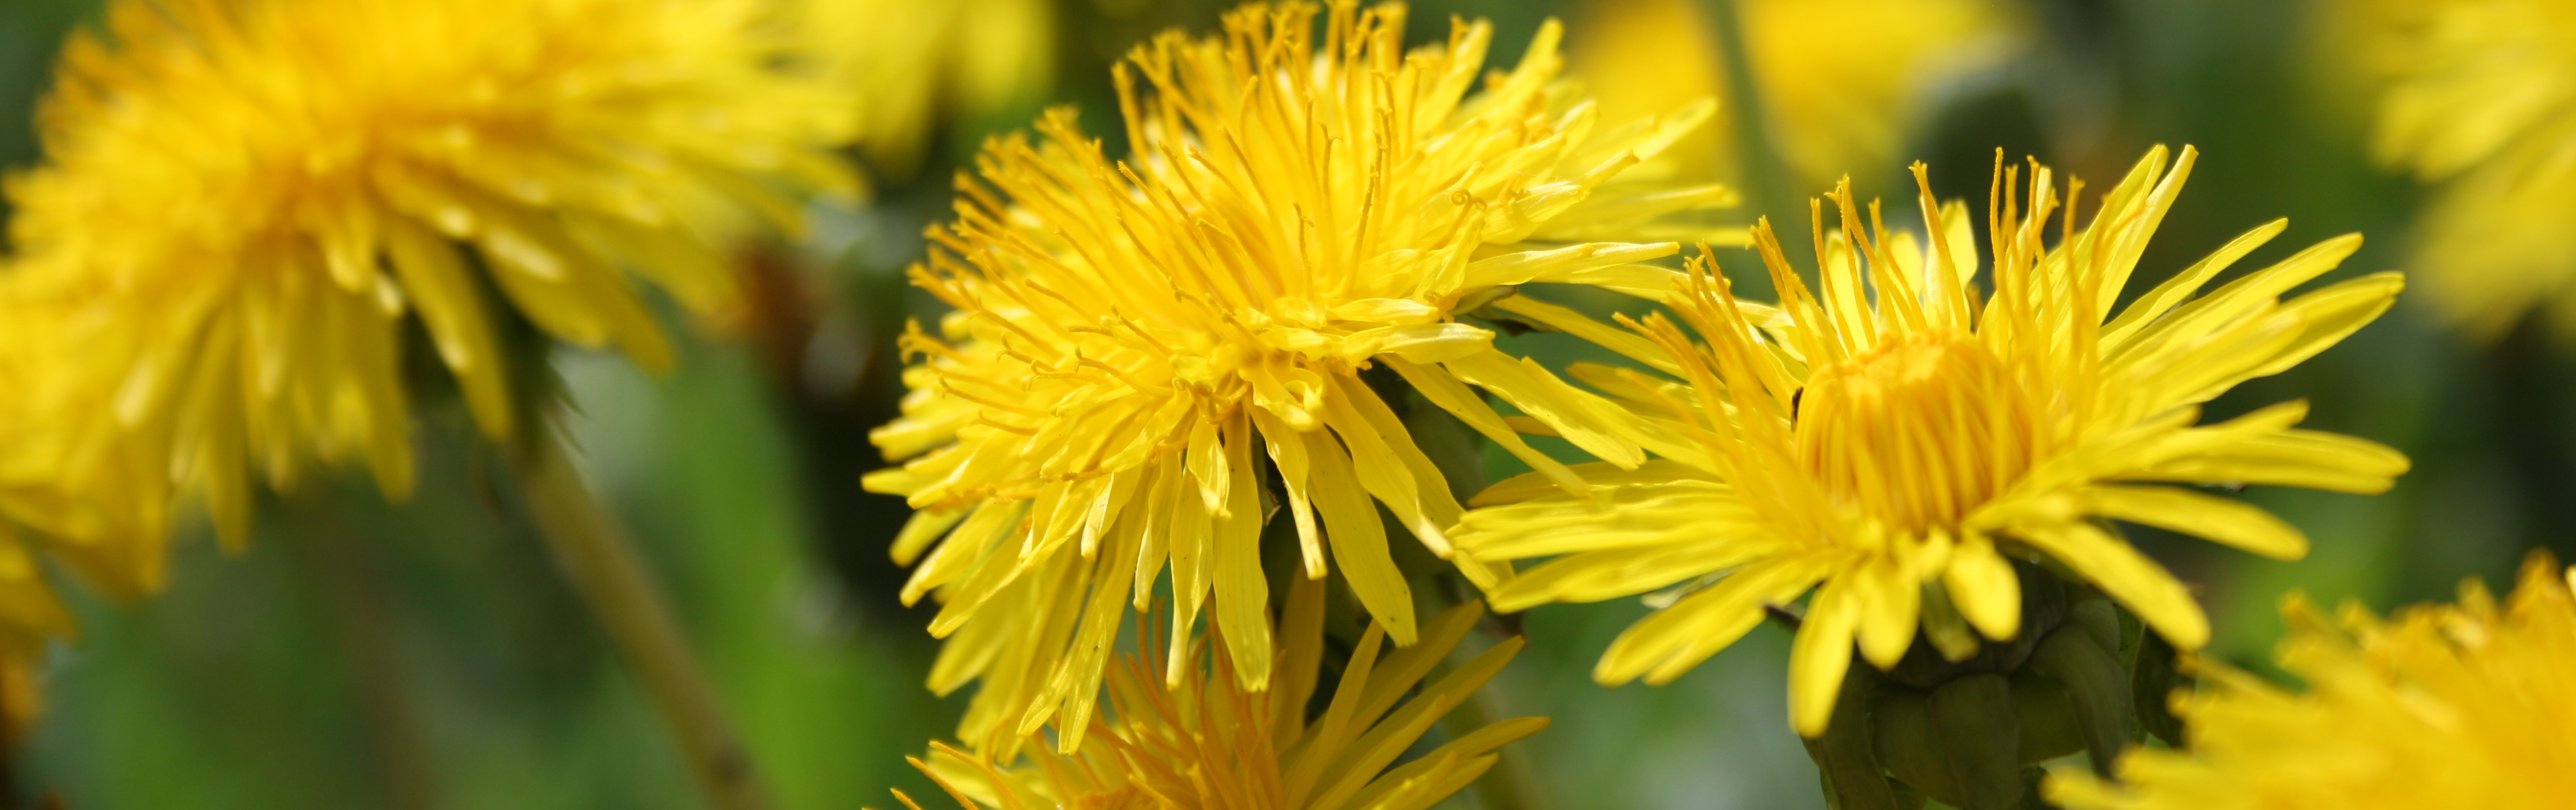 Dandelion: Much More Than A Weed | DonnieYance.com